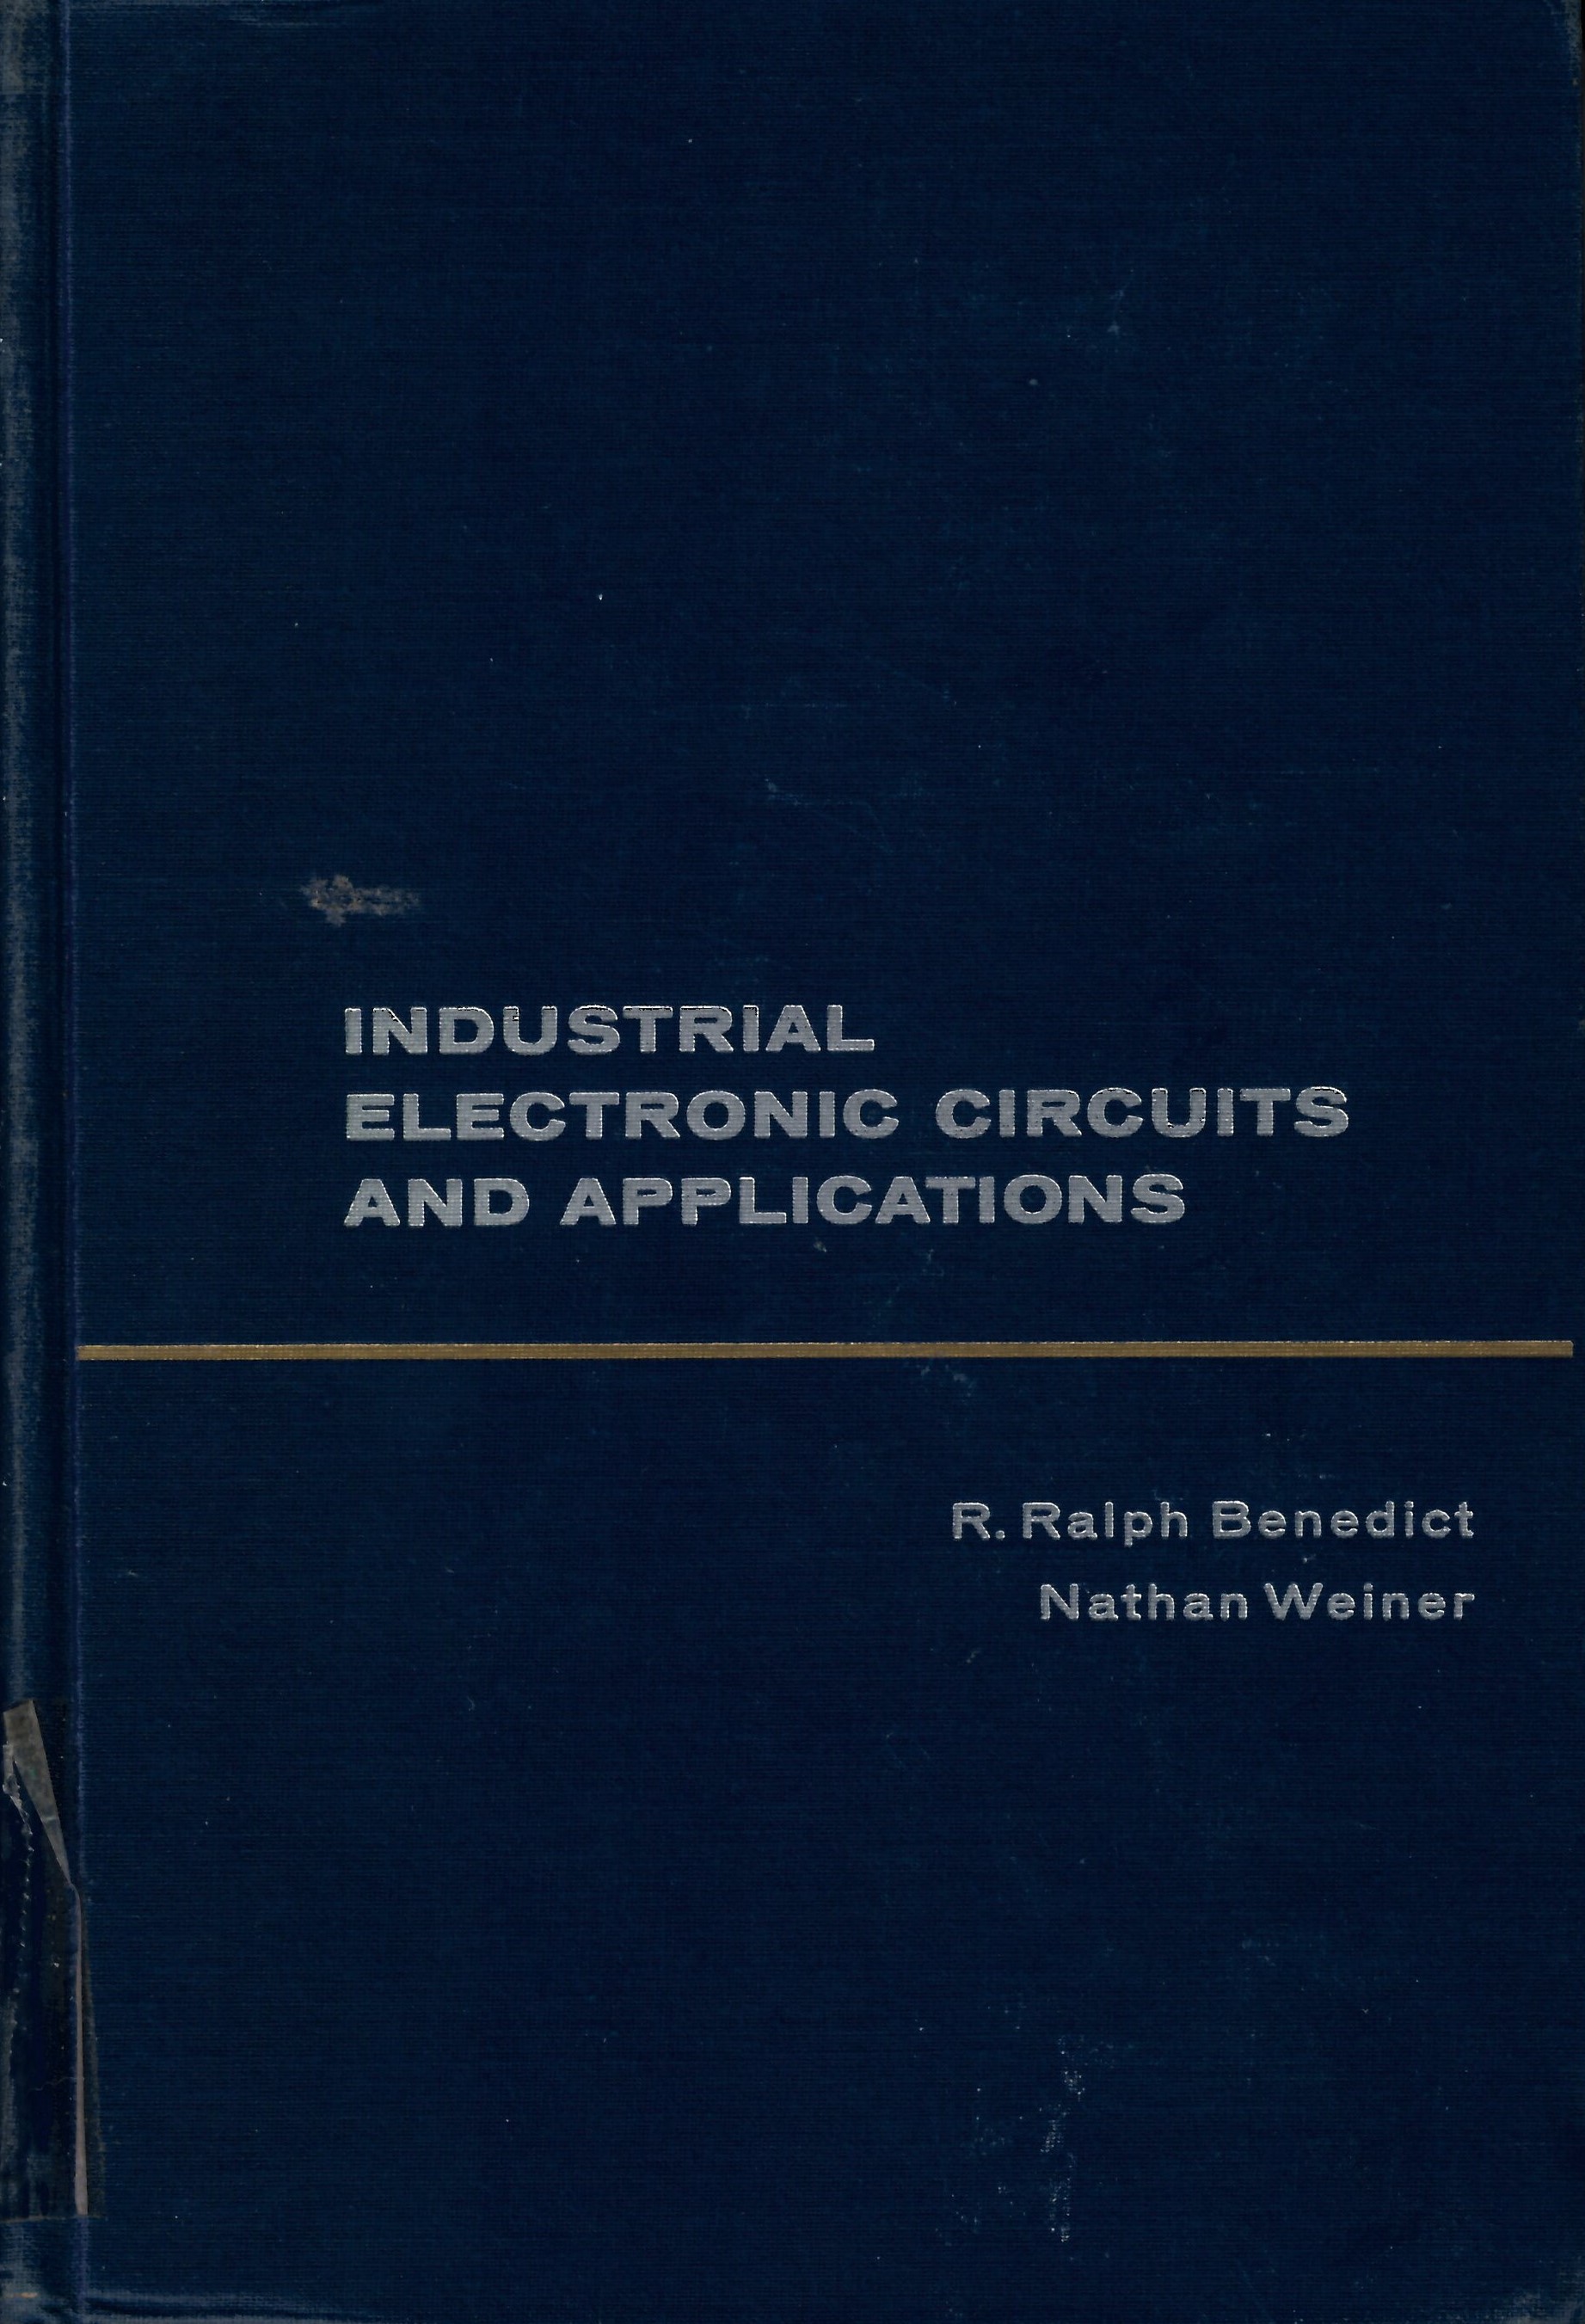 Industrial electronic circuits and applications